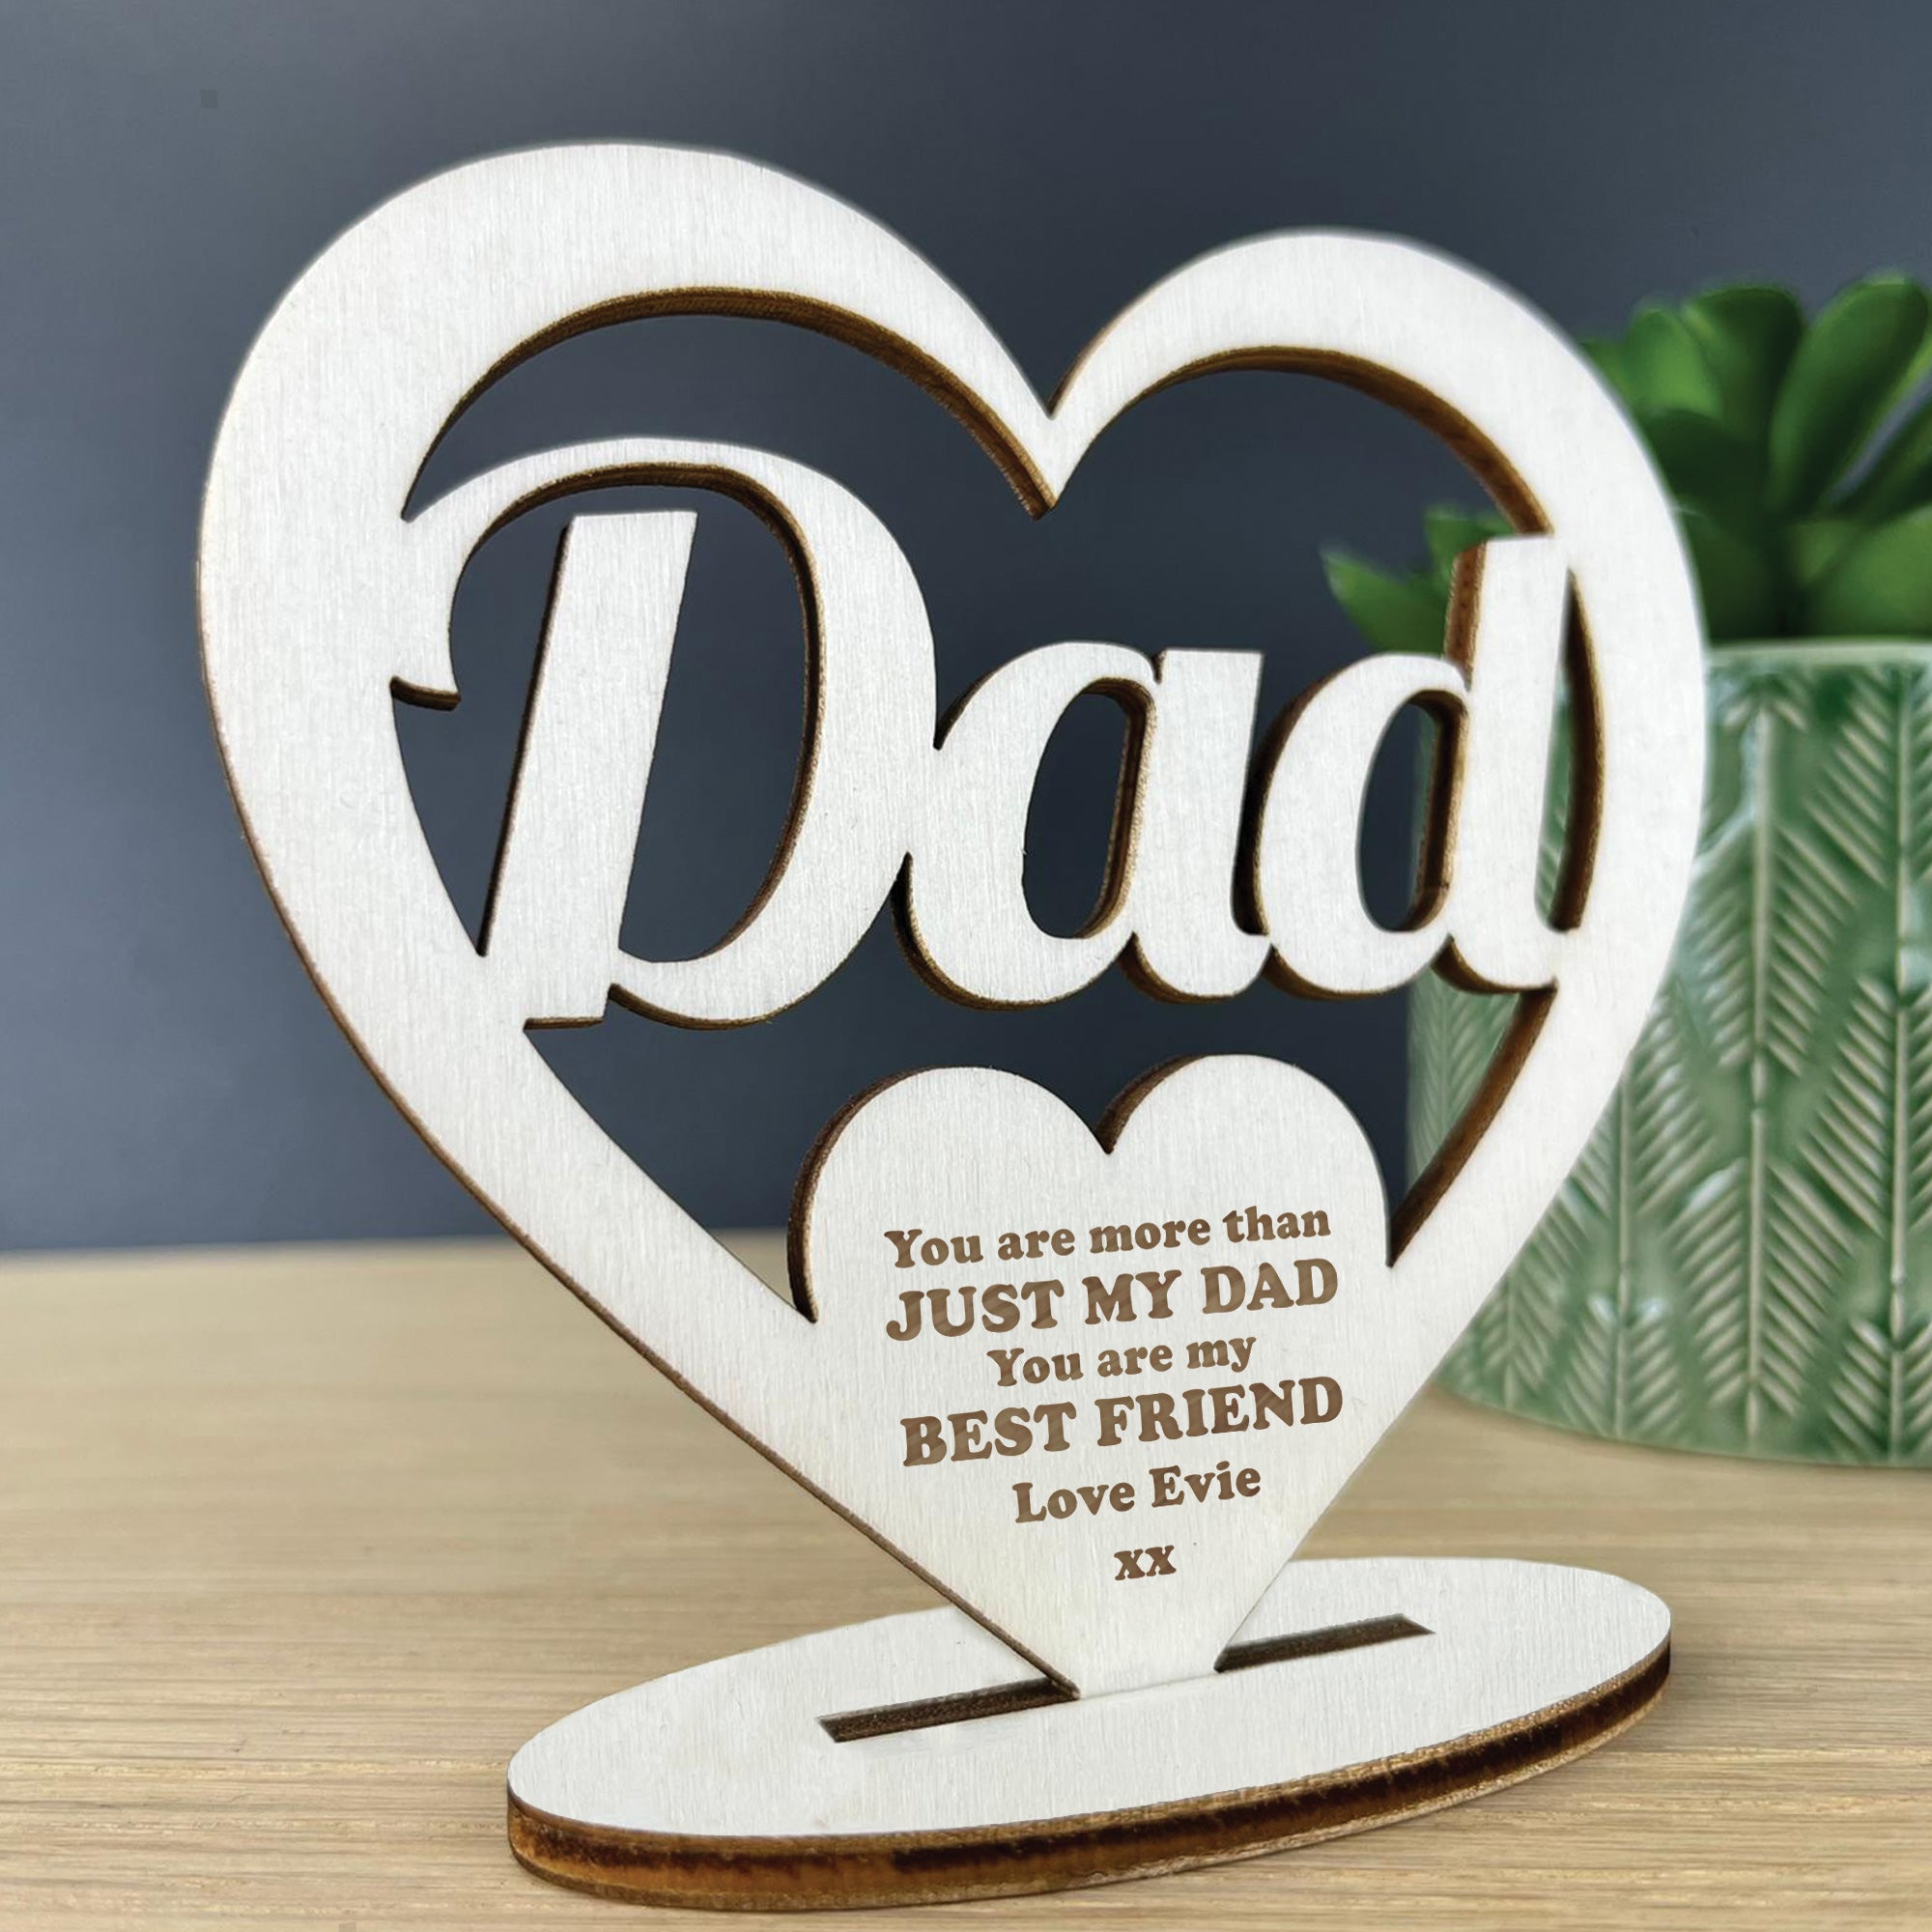 30 Best Birthday Gifts for Dad - Birthday Ideas for Fathers, Stepdads